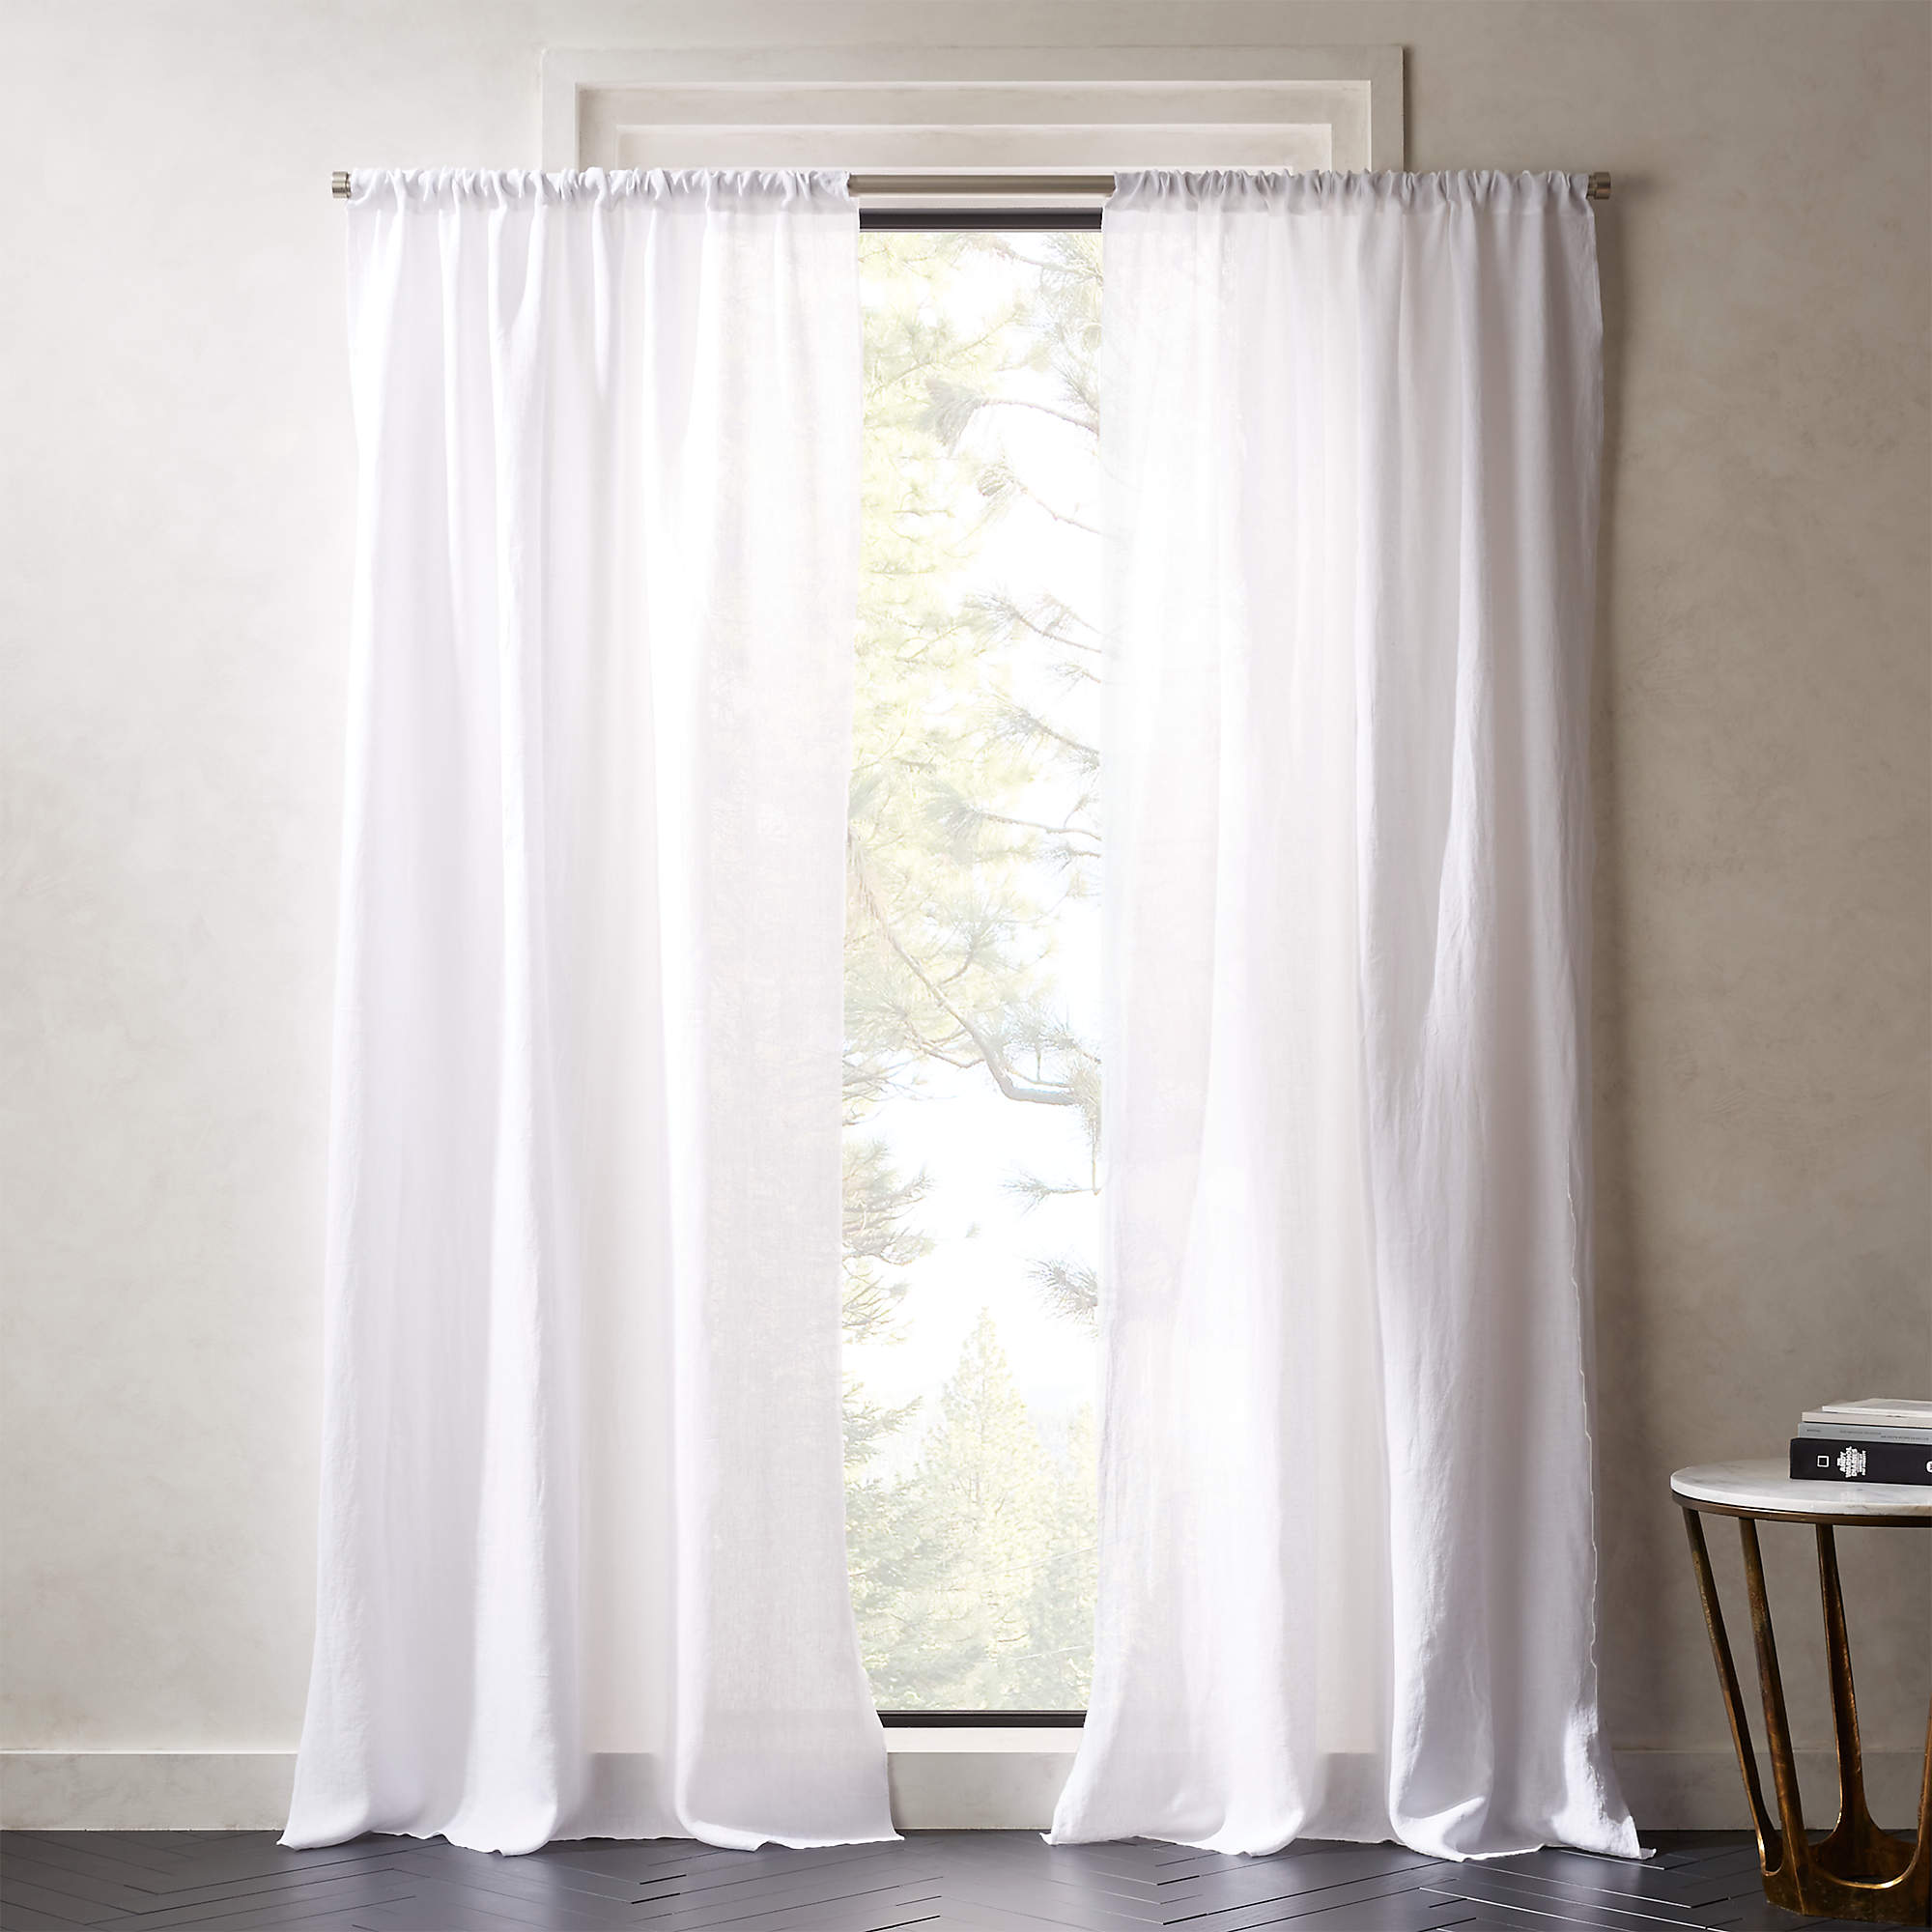 Shop WHITE LINEN CURTAIN PANEL from CB2 on Openhaus